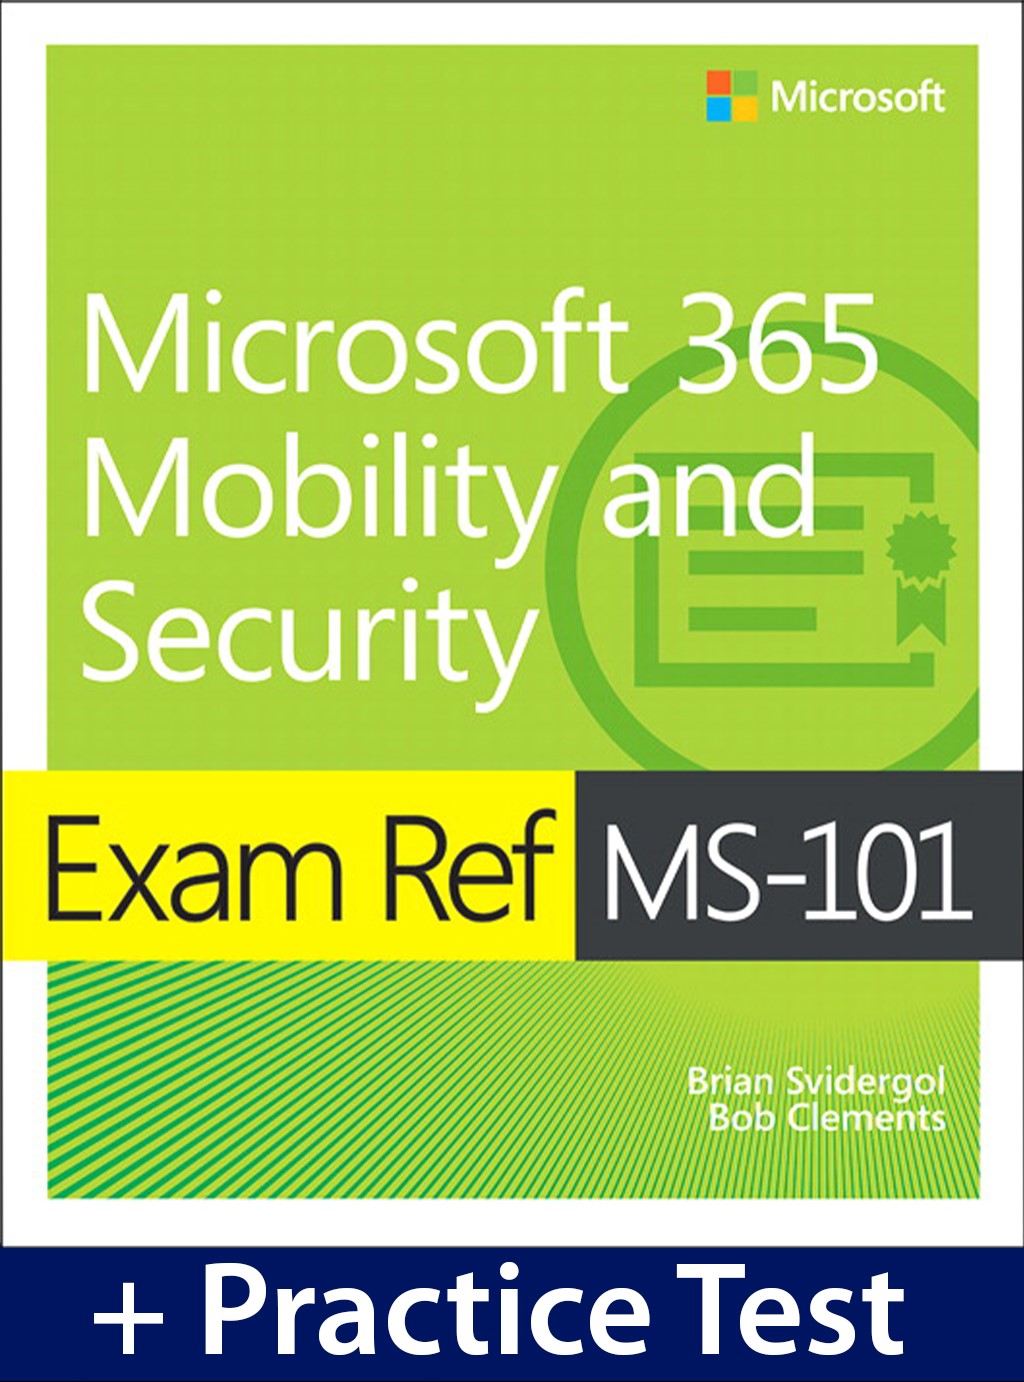 Exam Ref MS-101 Microsoft 365 Mobility and Security with Practice Test